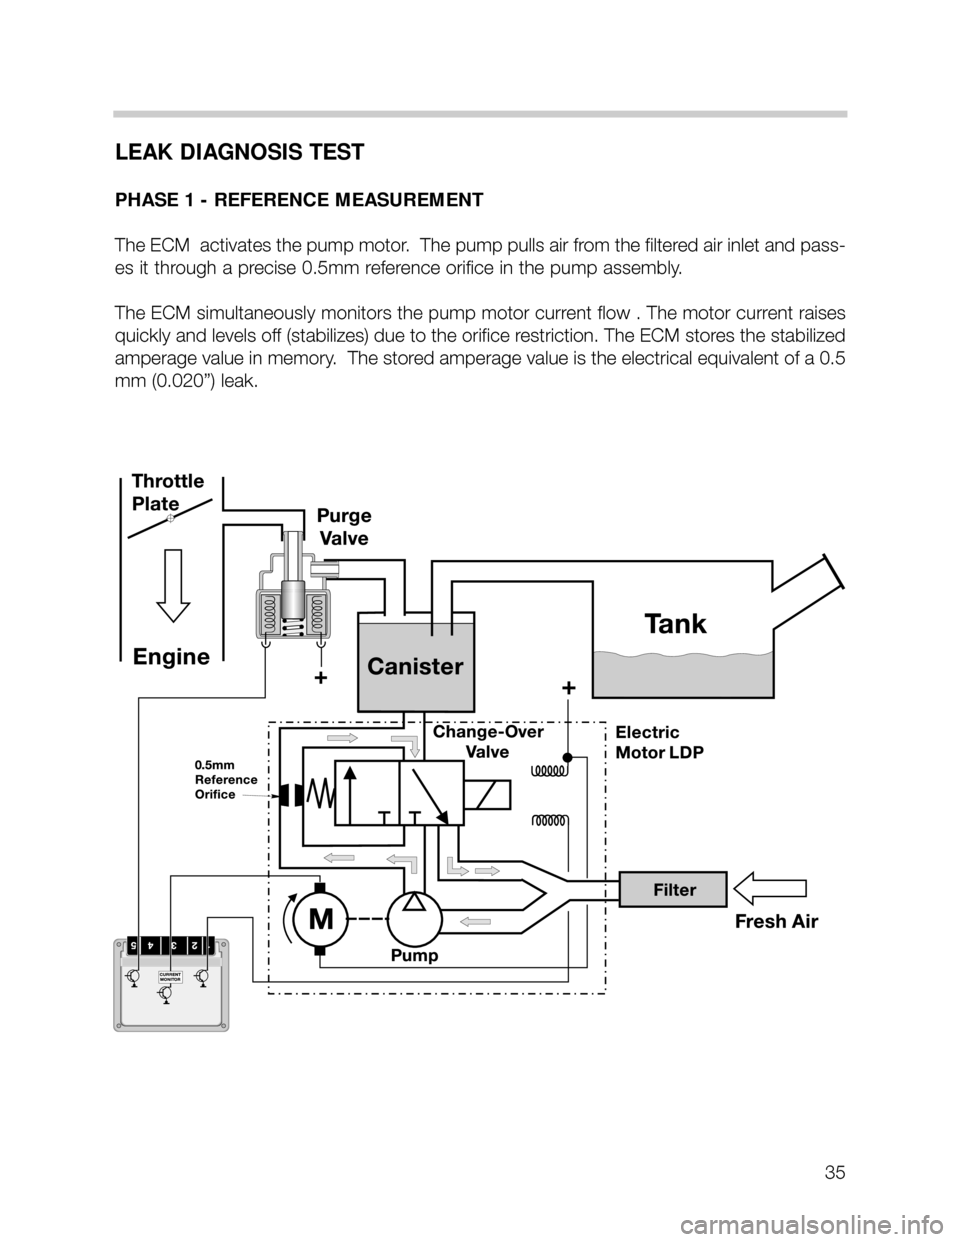 BMW 735i 2000 E38 M62TU Engine Owners Guide LEAK DIAGNOSIS TEST
PHASE 1 - REFERENCE MEASUREMENT
The ECM  activates the pump motor.  The pump pulls air from the filtered air inlet and pass-
es it through a precise 0.5mm reference orifice in the 